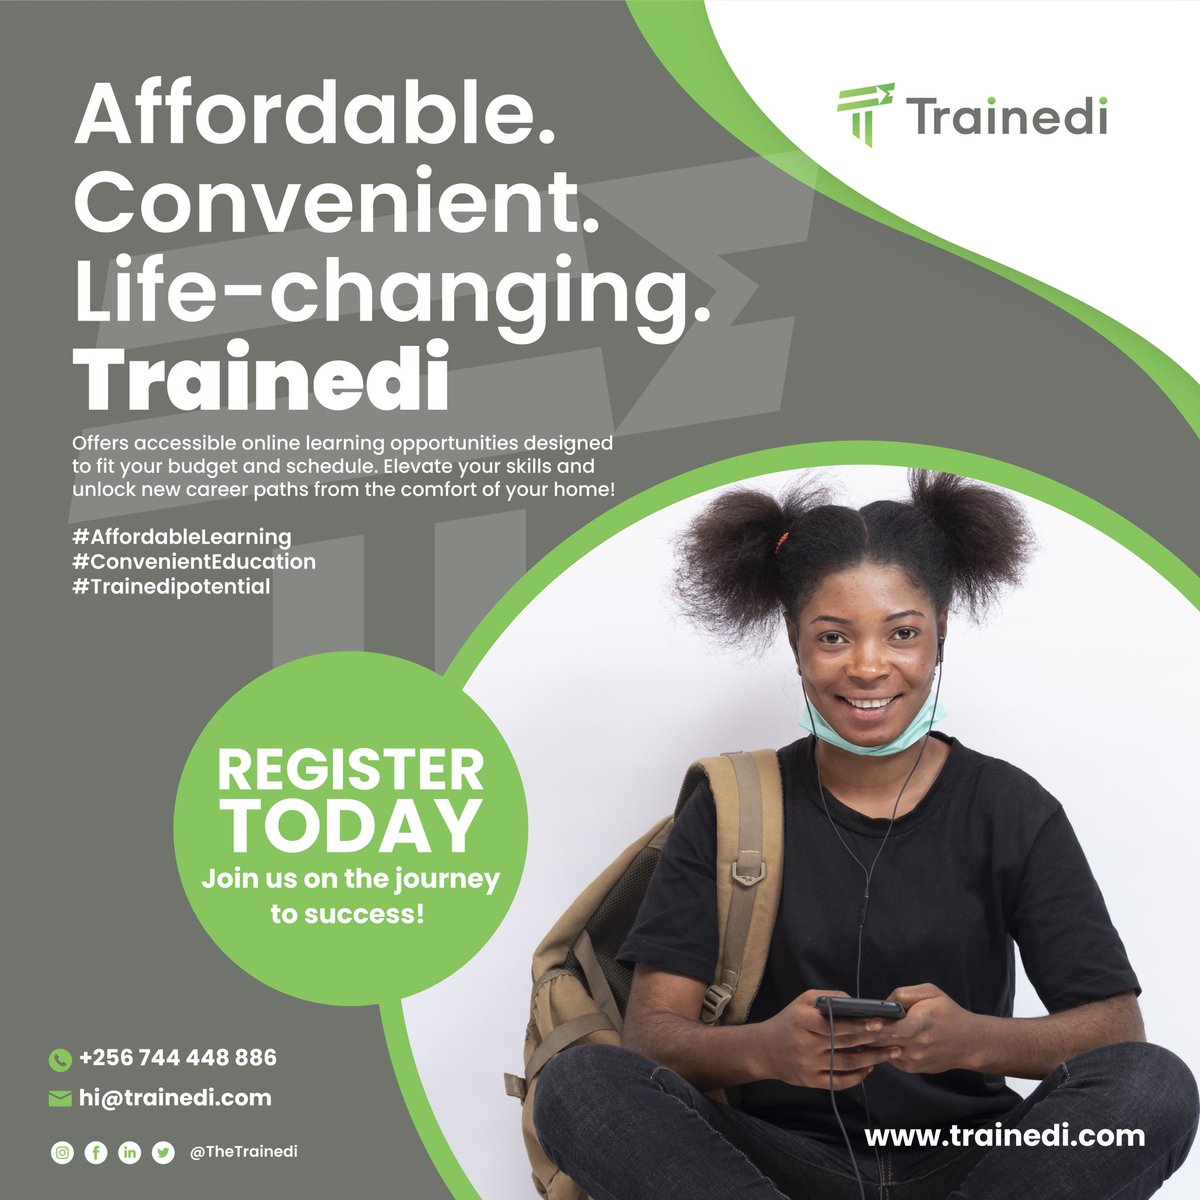 Affordable online courses designed to fit your budget, schedule and you can elevate your skills in the comfort of your home. All you have to do is register here trainedi.com/register/ and start your online course today at affordable rates.